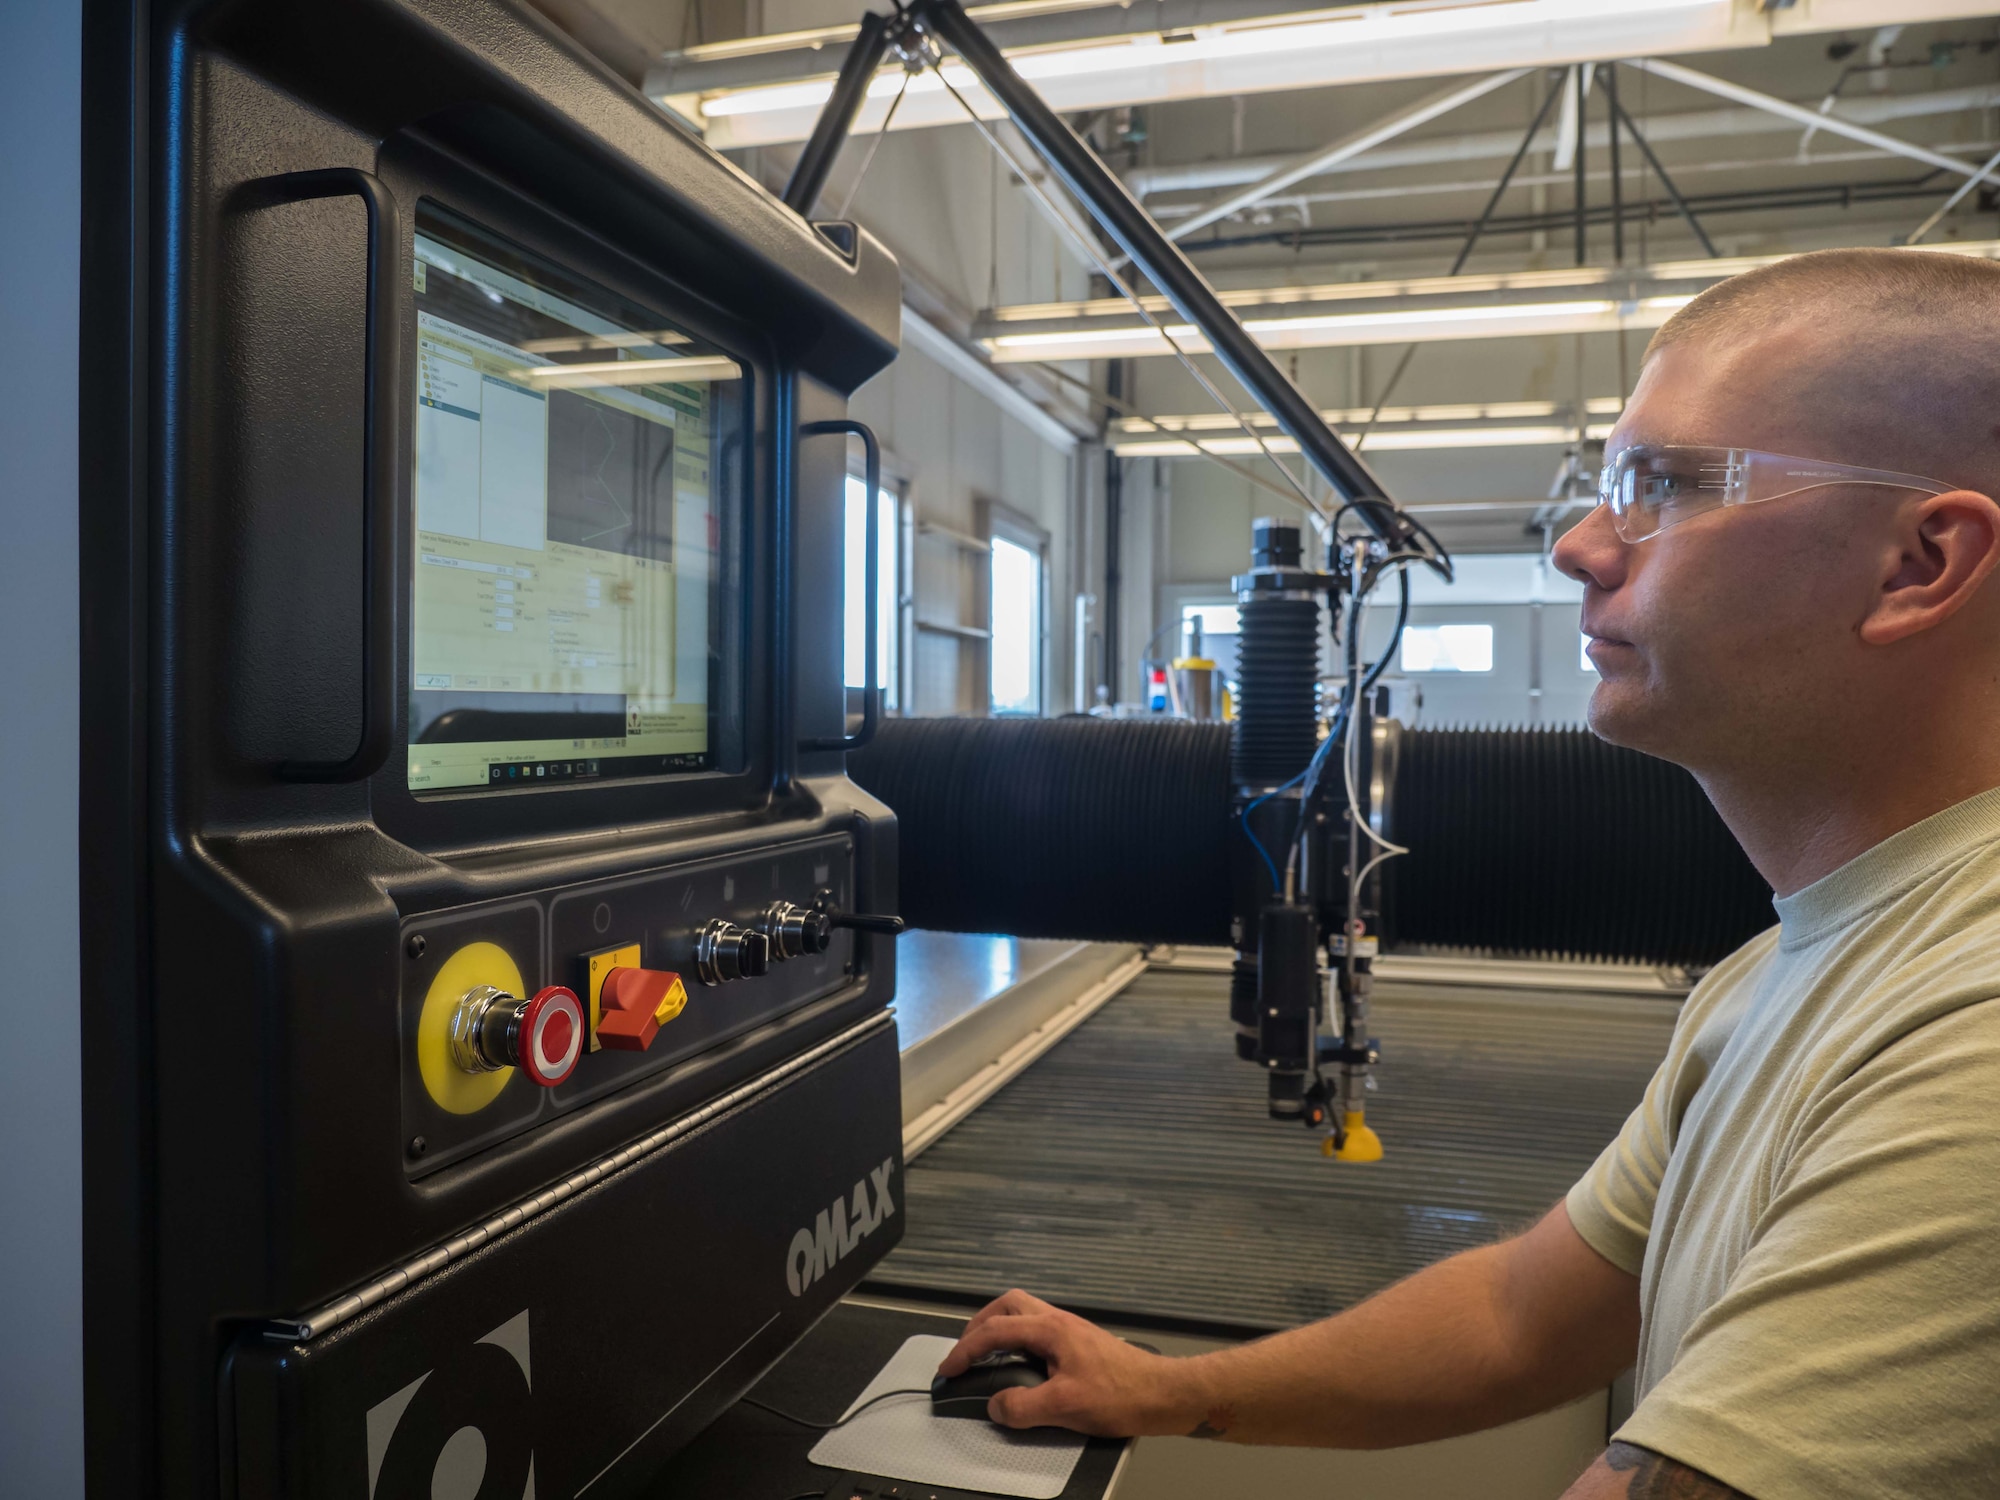 Tech. Sgt. Tyler Horner operates the water jet cutting machine. (Air Force Photo/Paul Zadach)